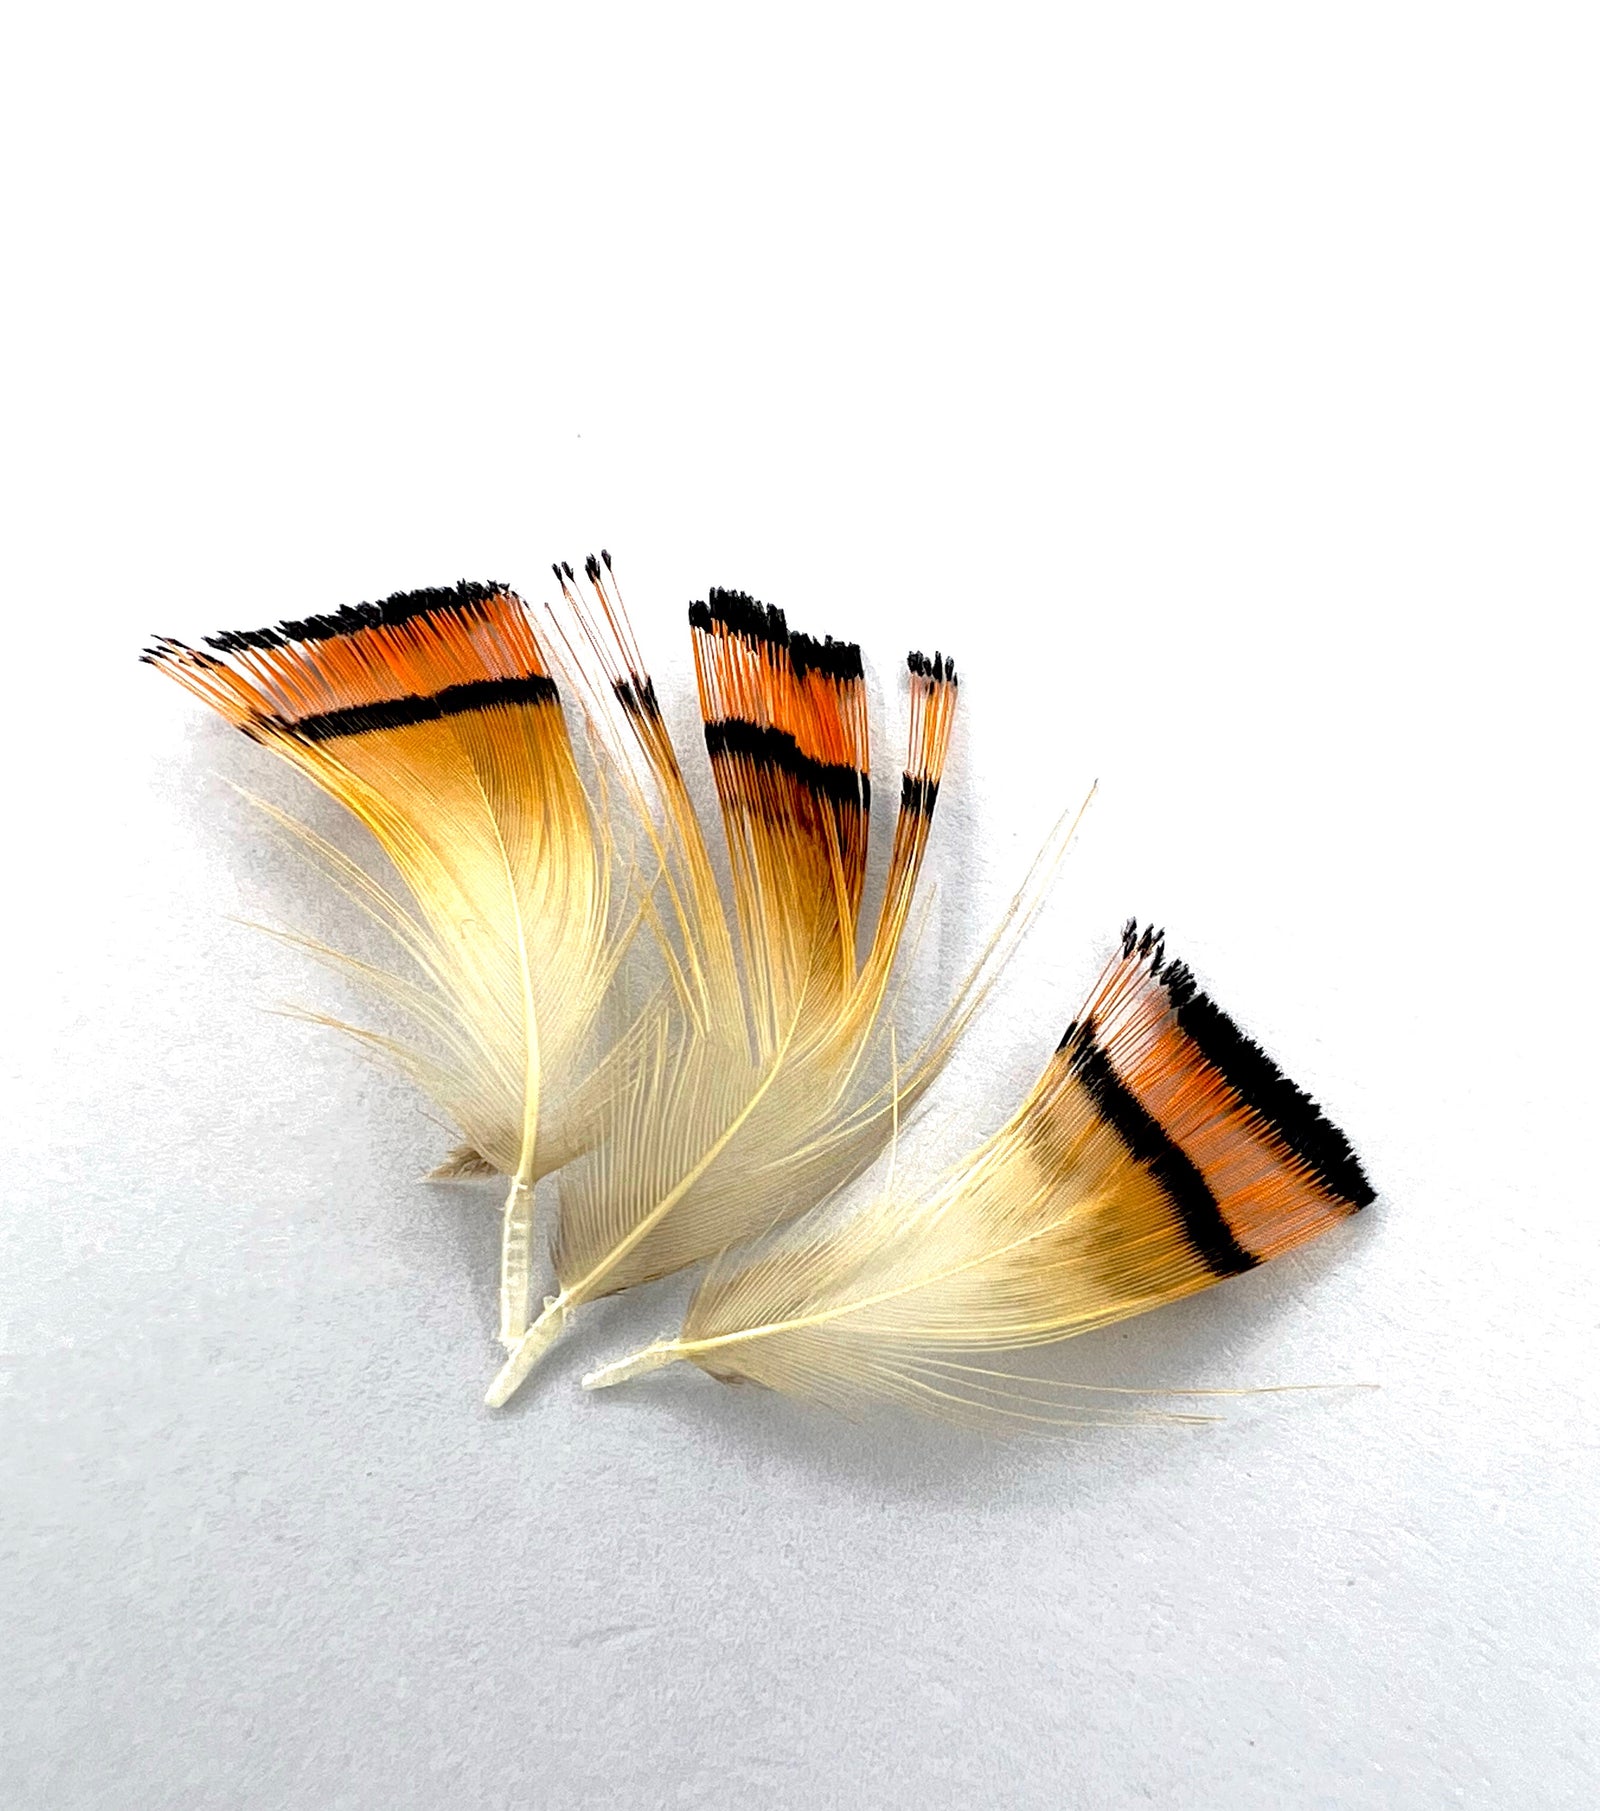 Fly Tying Materials - Feathers  Ashland Fly Shop Tagged golden